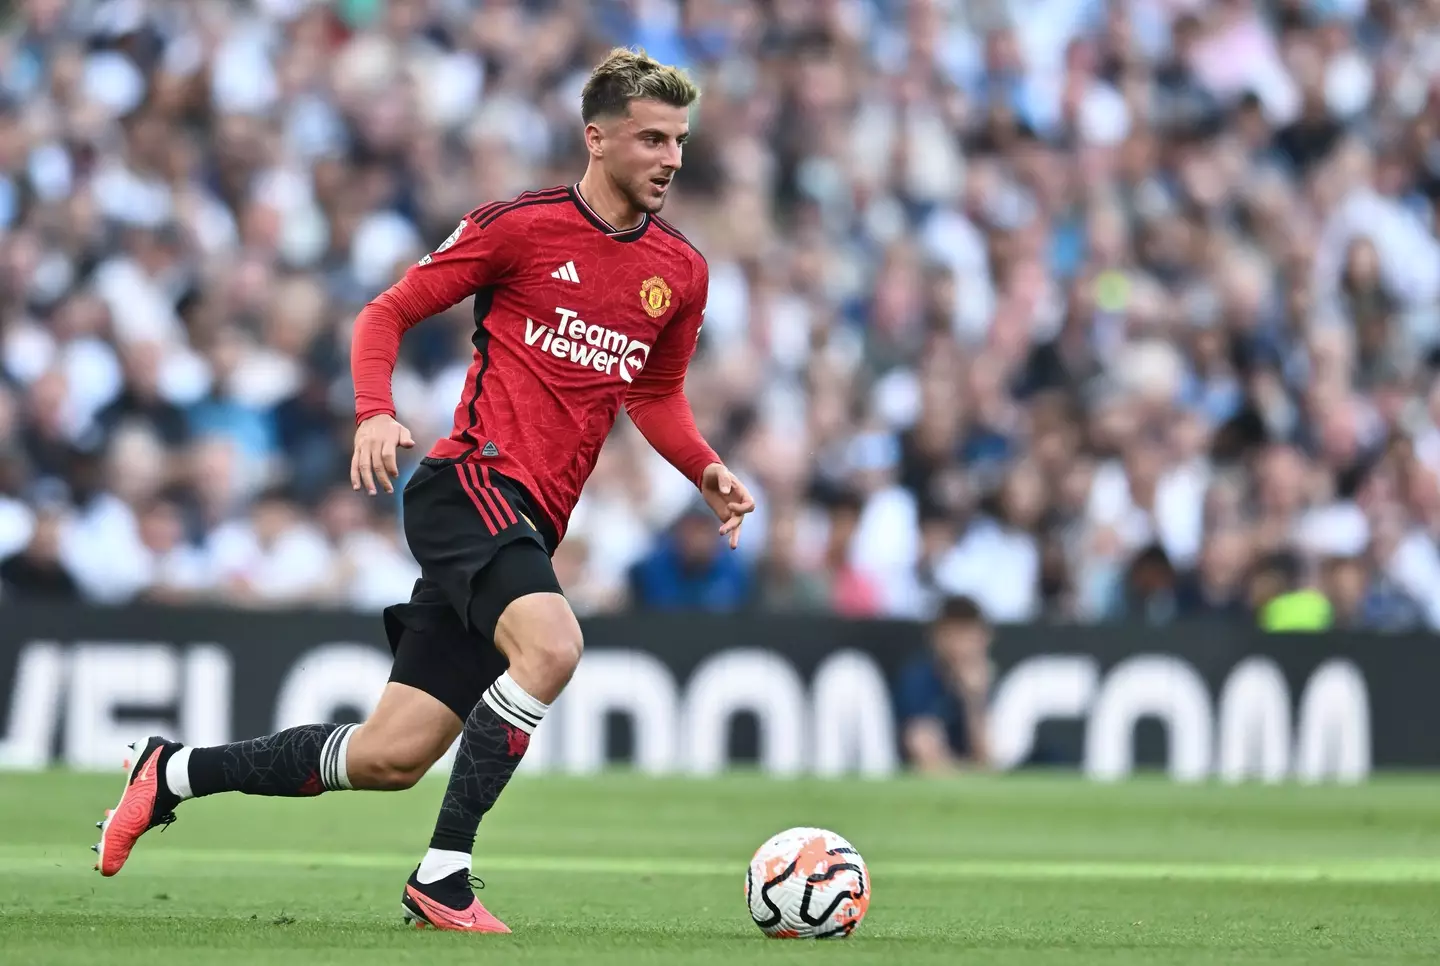 Mason Mount in action for Manchester United. Image: Getty 